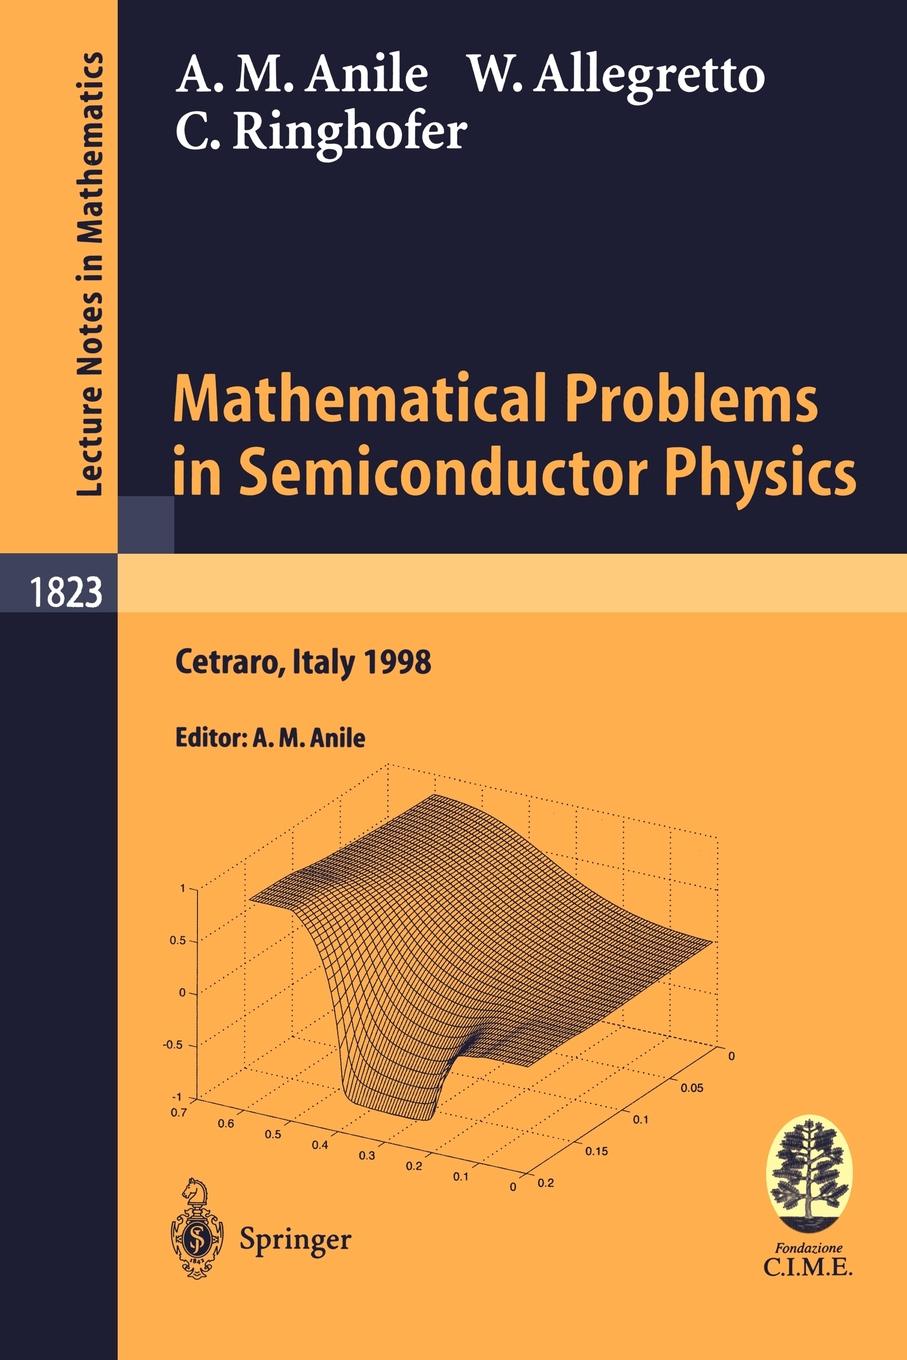 Mathematics problems. Problems in Mathematics. Semiconductor physics. Modeling Mathematical problems. Springer lecture Note in Mathematics Cover.